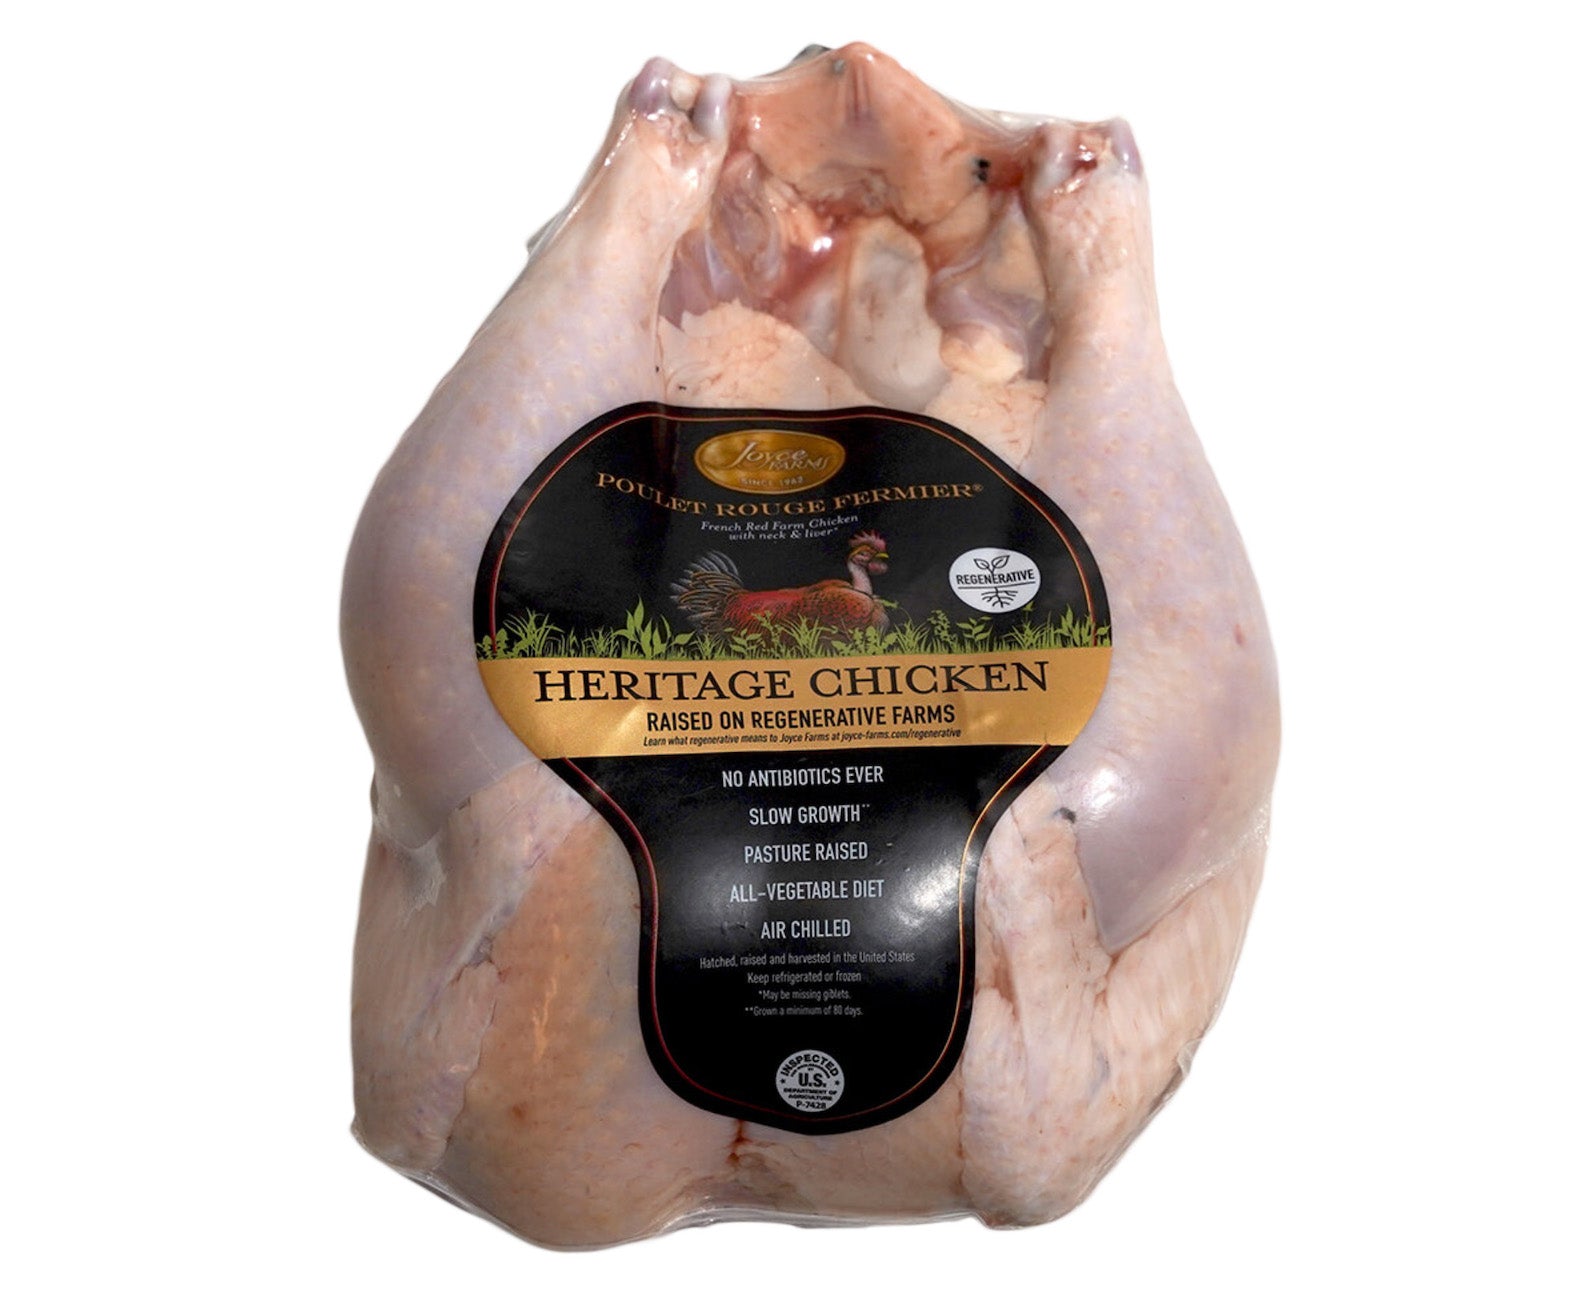 Photo of raw, packaged Poulet Rouge® Heritage Chicken from Joyce Farms - Raised on Regenerative Farms, No antibiotics ever, slow growth, pasture raised, all-vegetable diet, air chilled